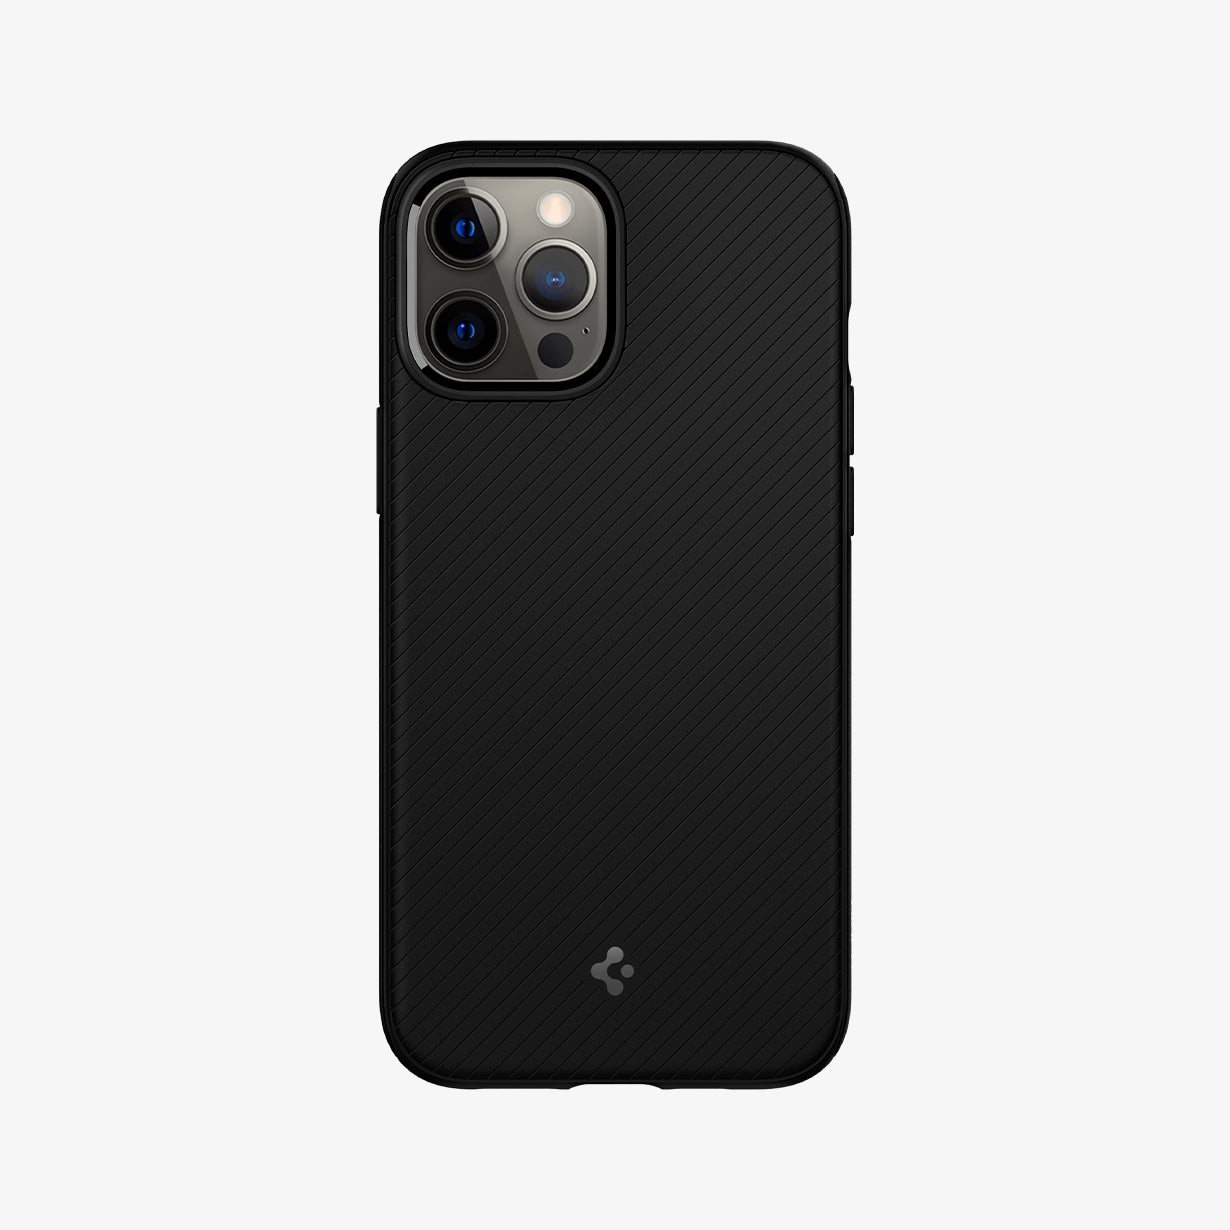 ACS01864 - iPhone 12 Pro Max Case MagArmor in black showing the back